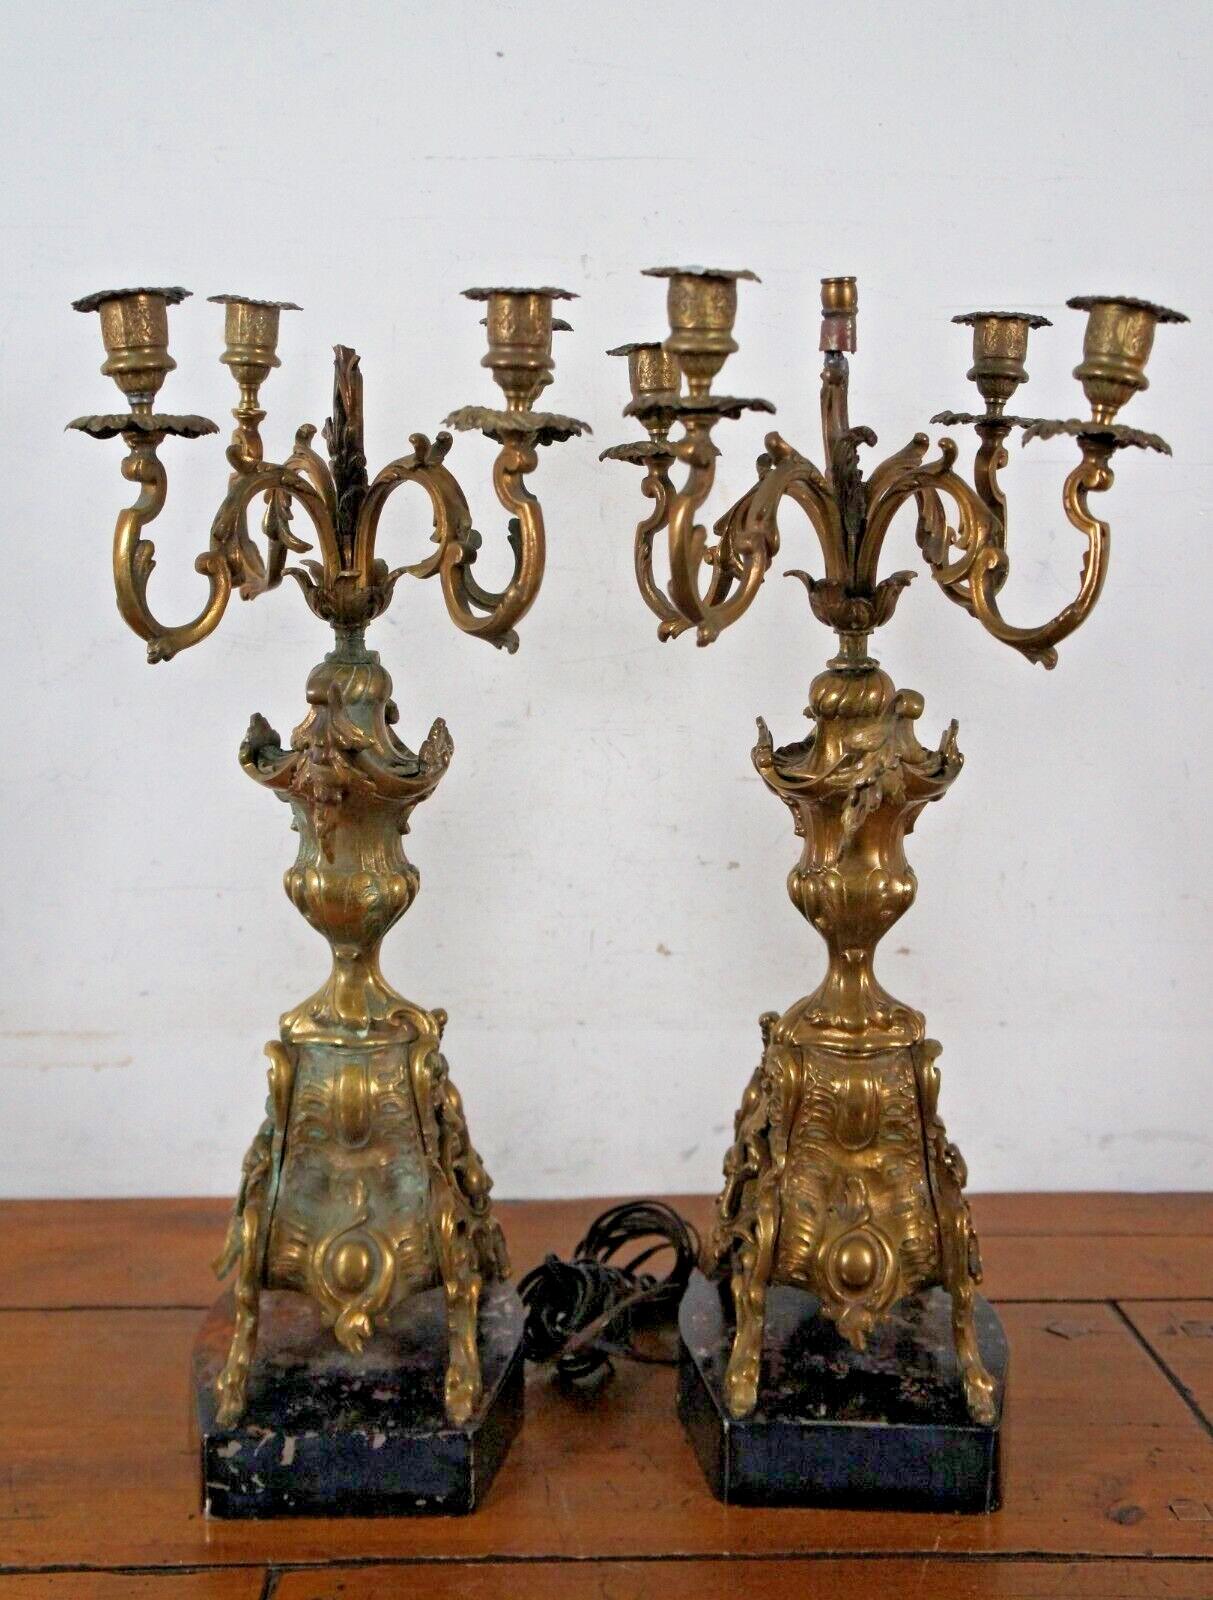 20th Century 2 Antique Baroque 4 Arm Candelabras Candle Holders Converted Lamps 20